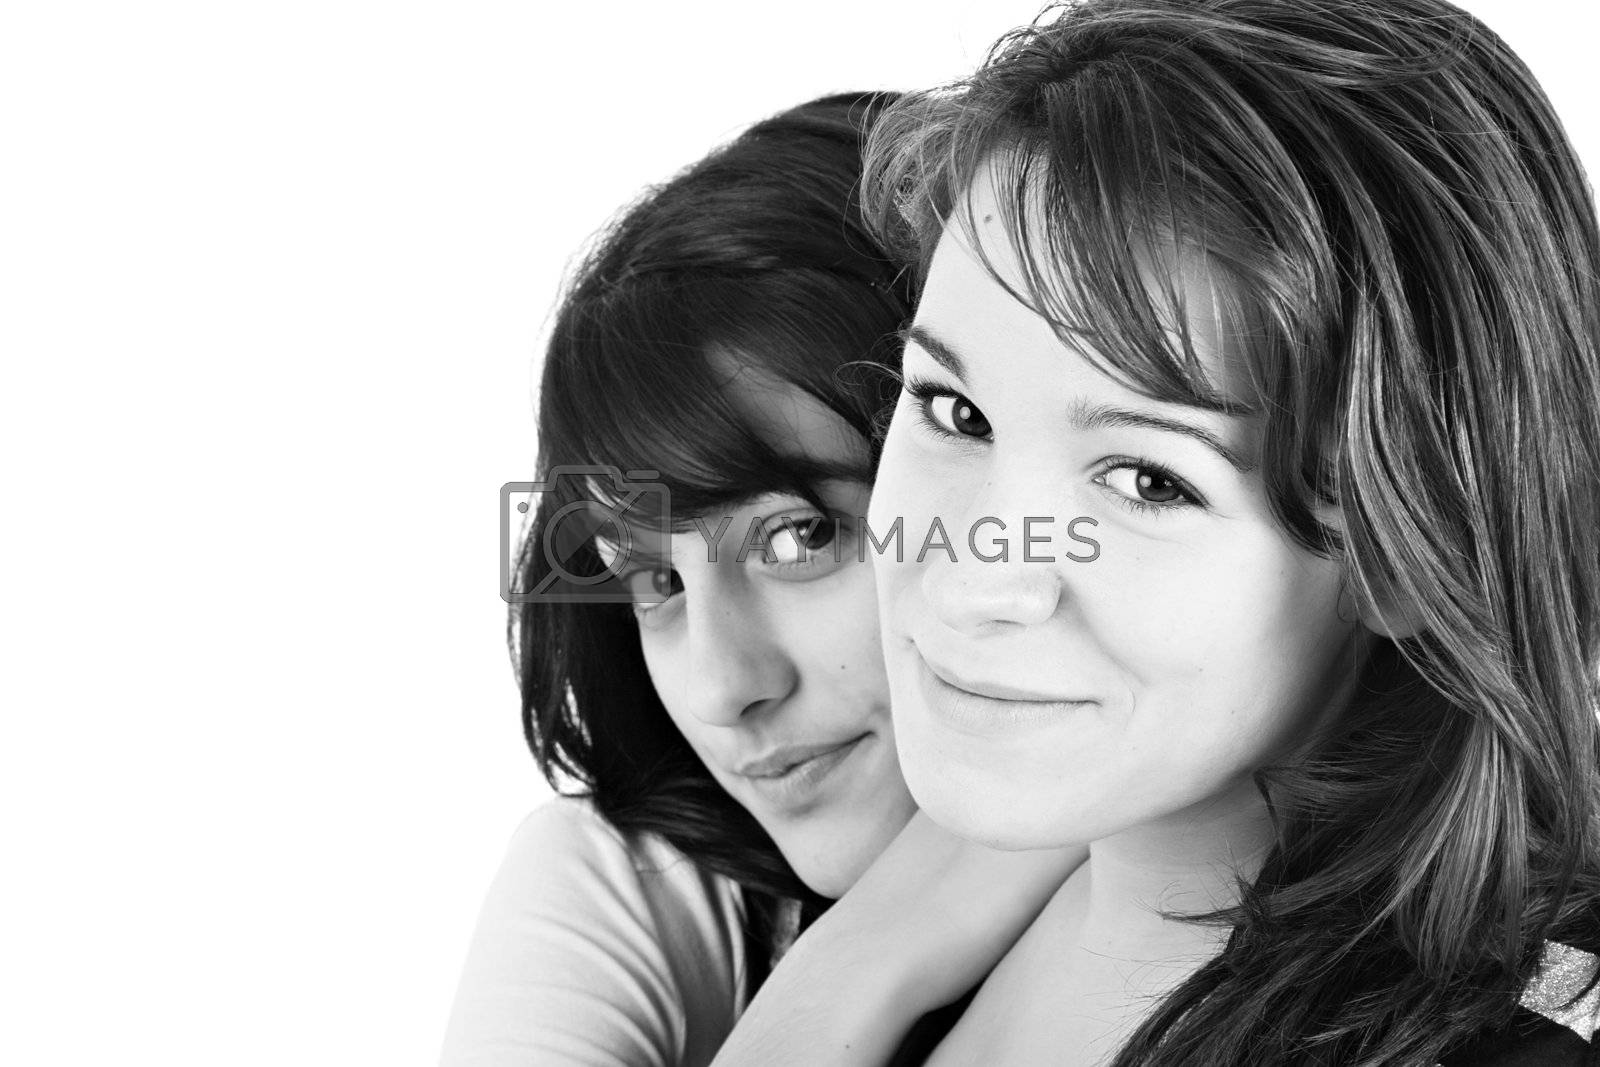 Royalty free image of Friends by ajn